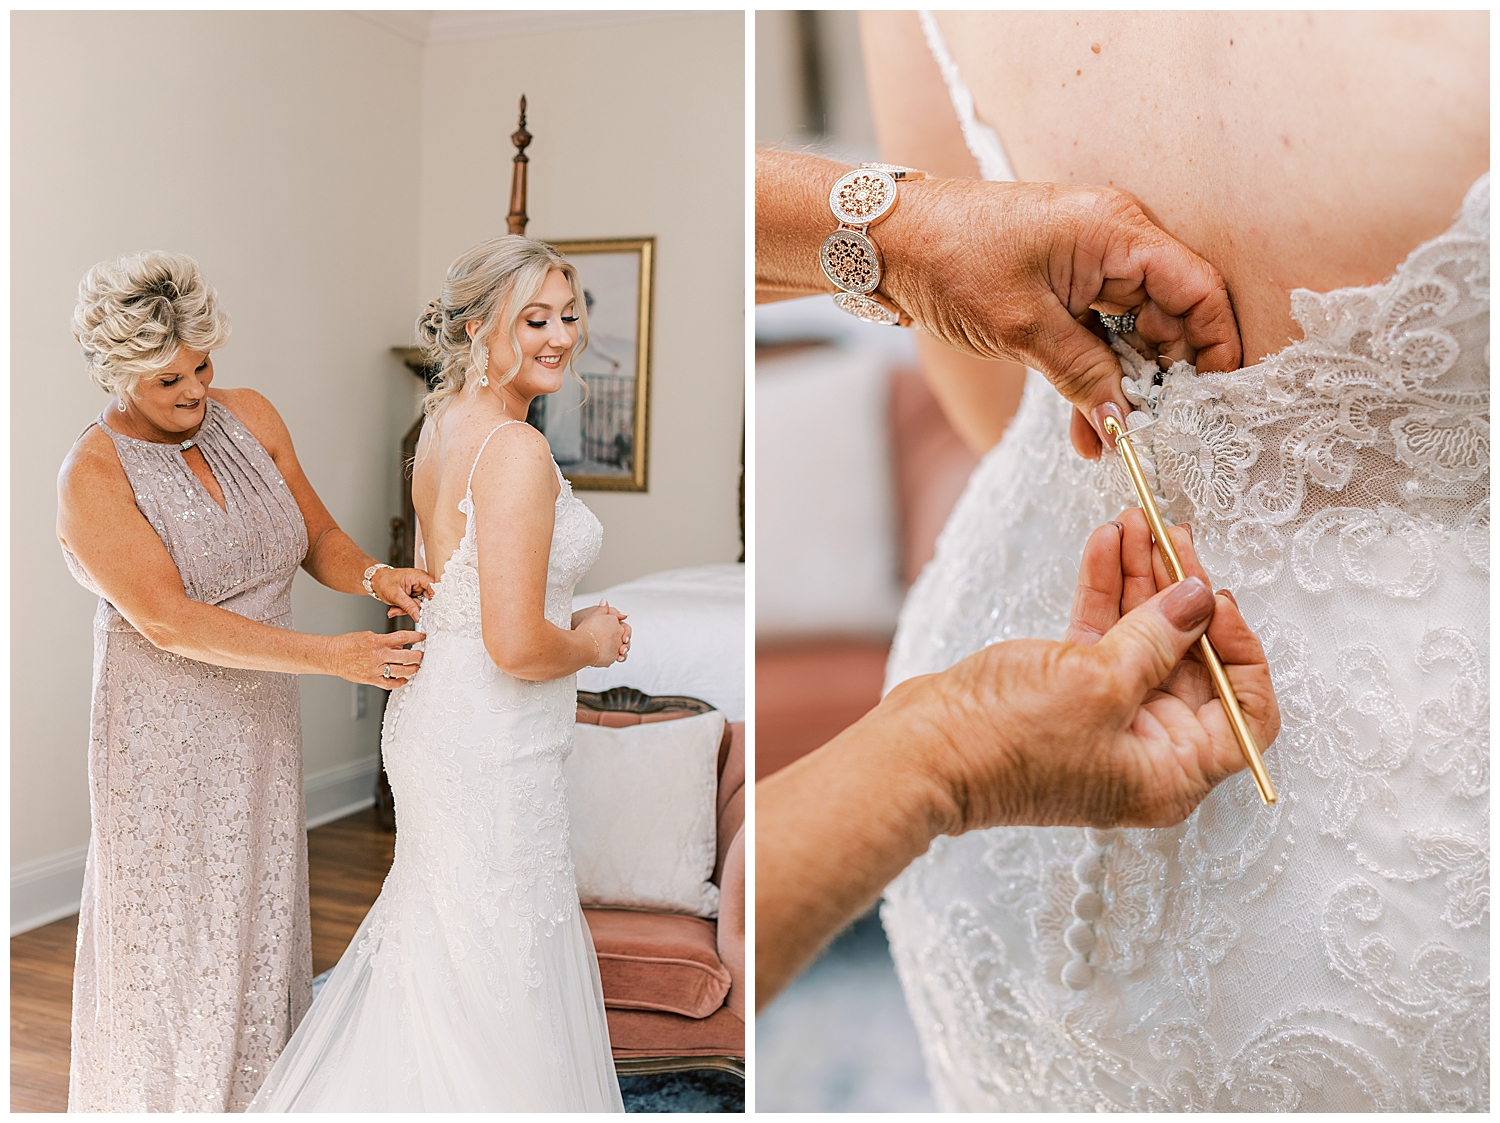 A bride gets dressed with the help of her mom.